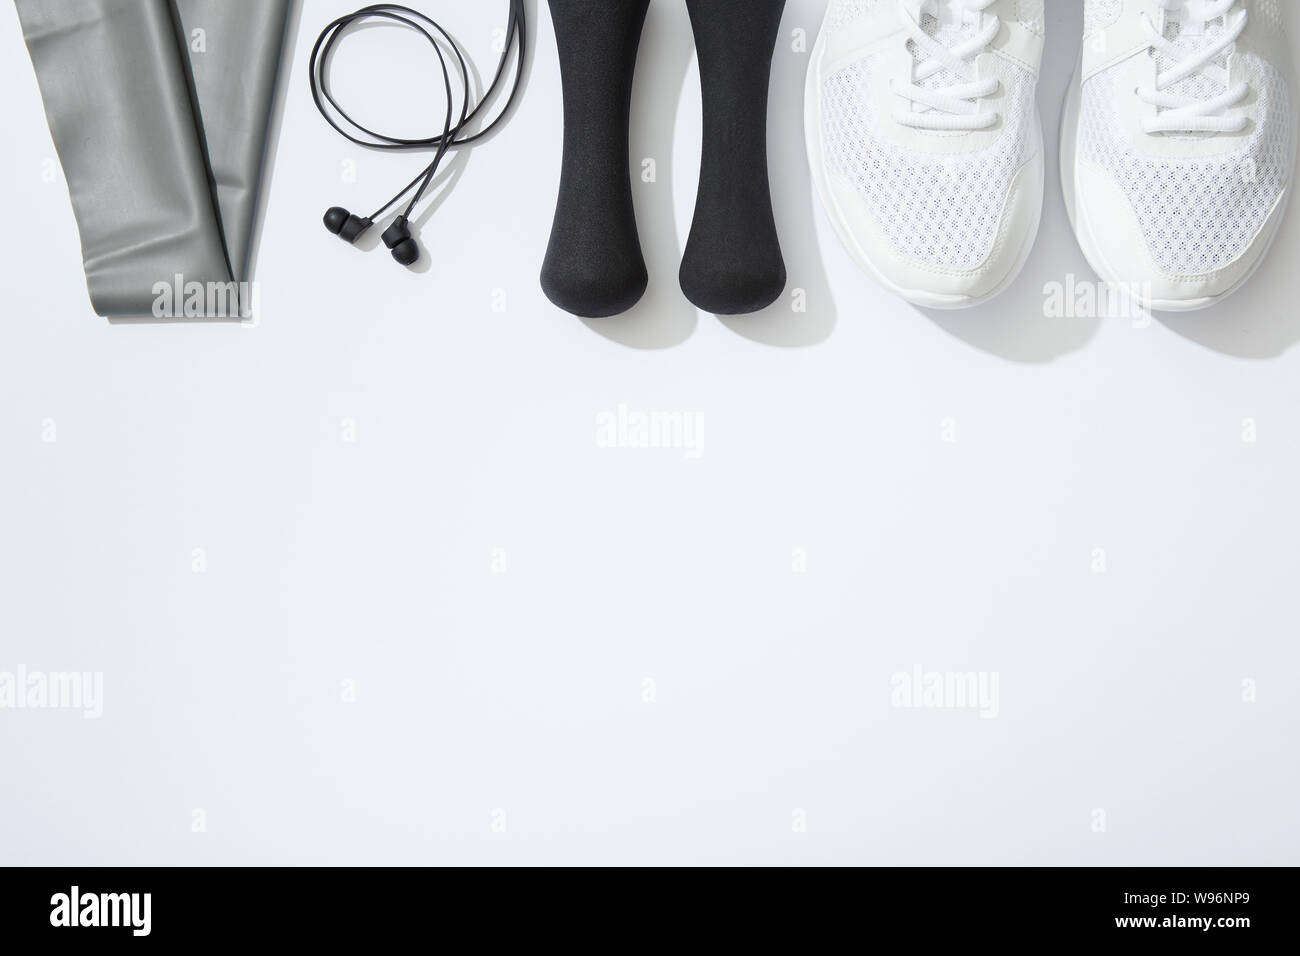 Sport flat lay with gym equipment accessories on white background Stock Photo